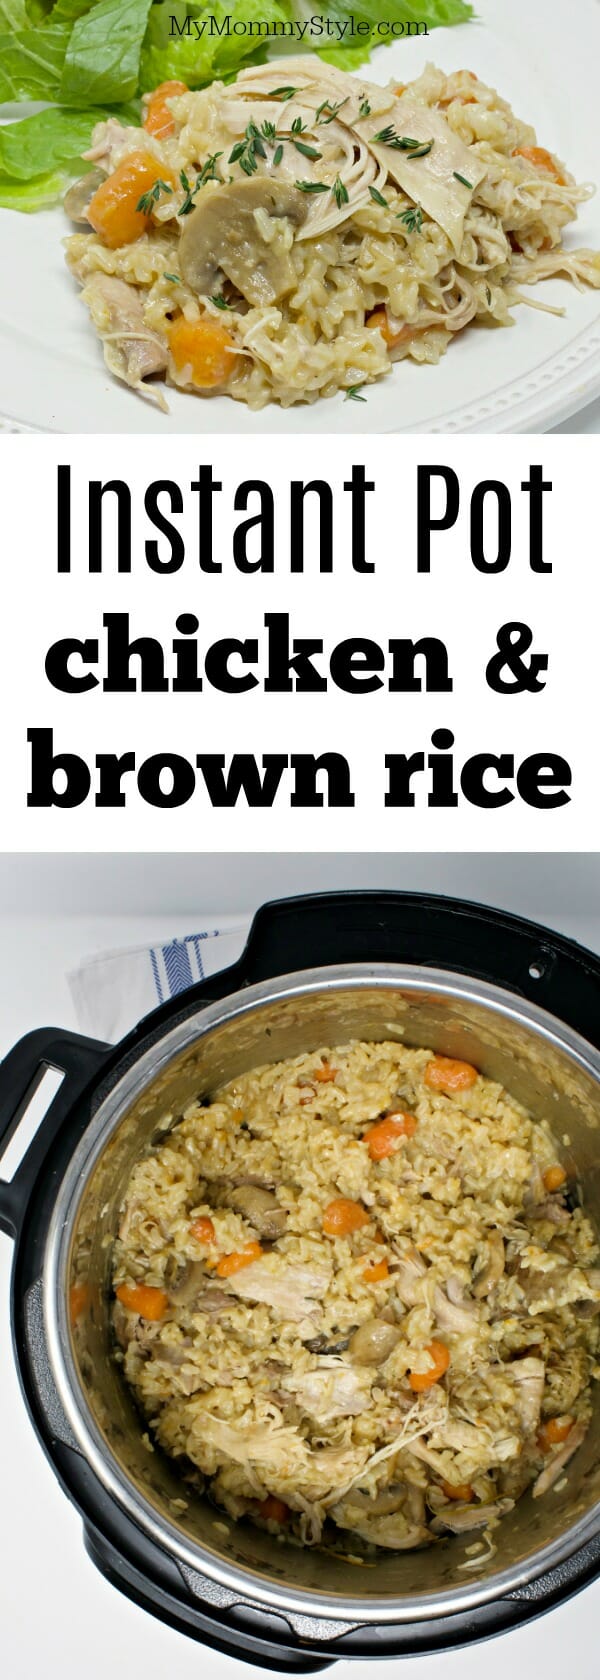 Instant pot chicken and rice - My Mommy Style